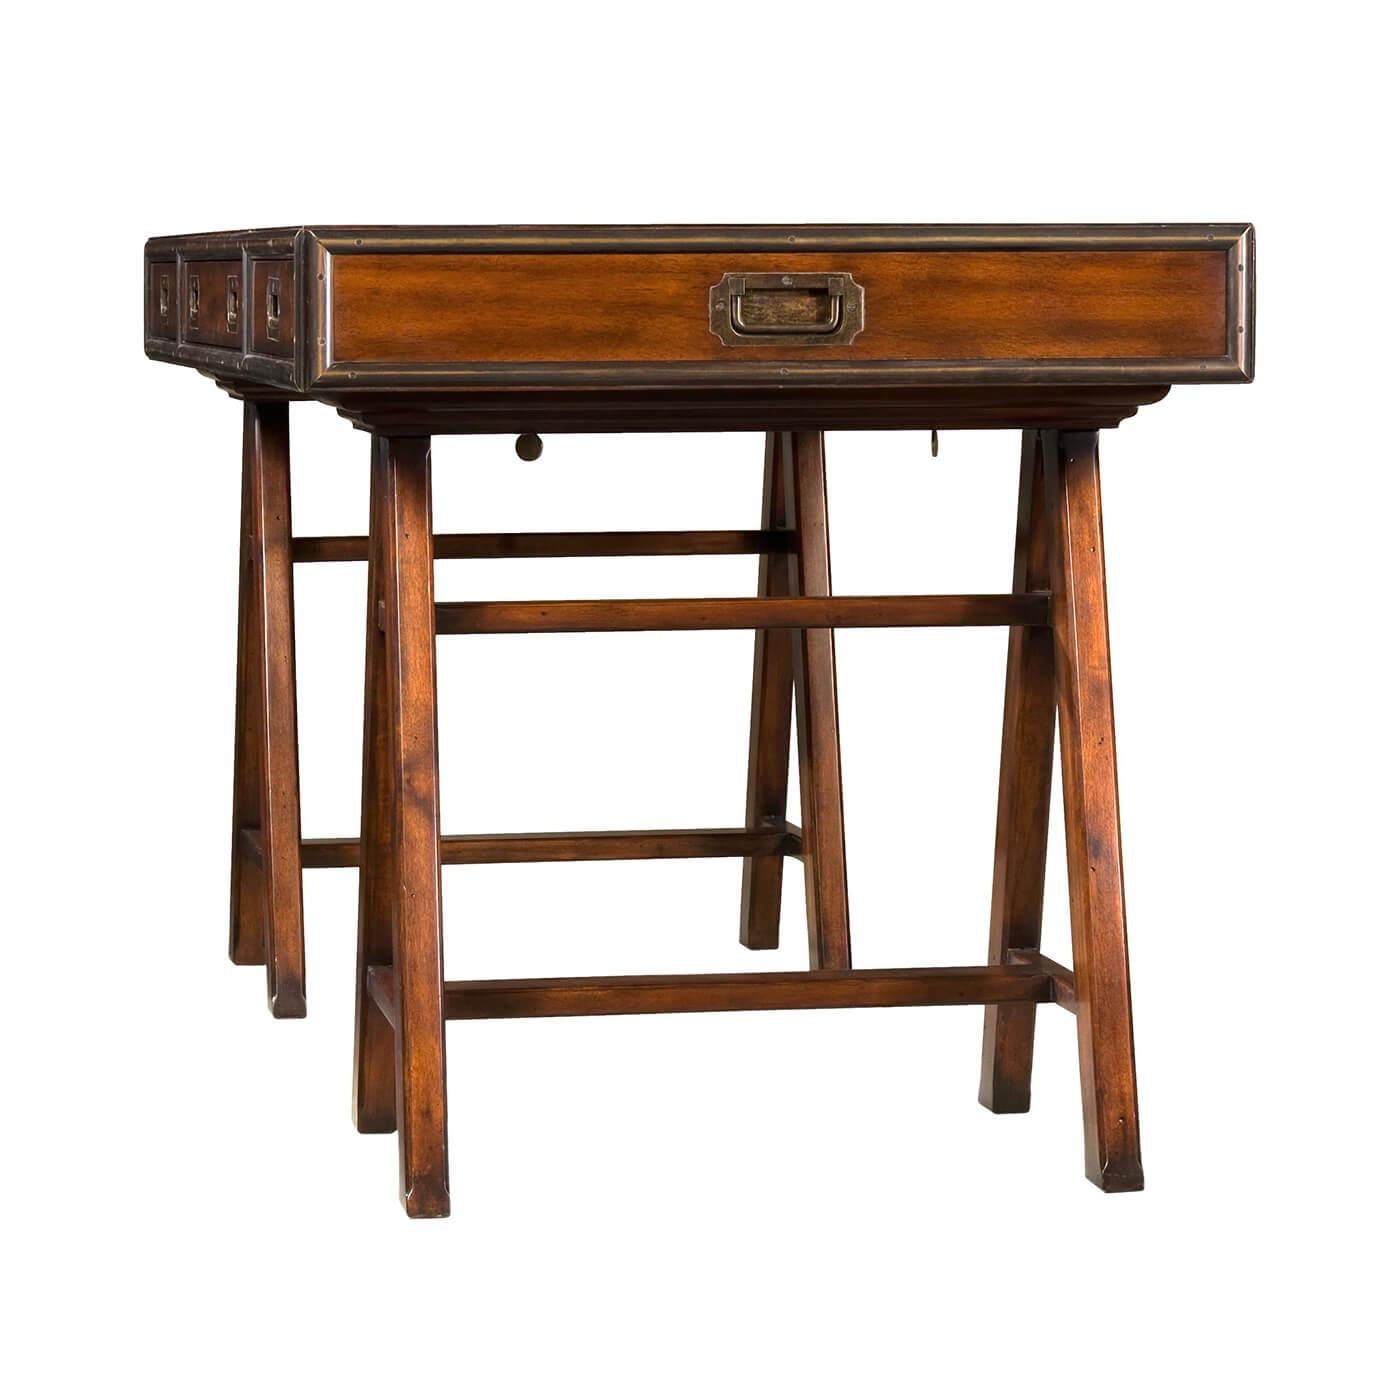 Campaign style writing table a brass bound writing table with three frieze drawers and raised on architectural-inspired trestle end bases. 

Dimensions: 60